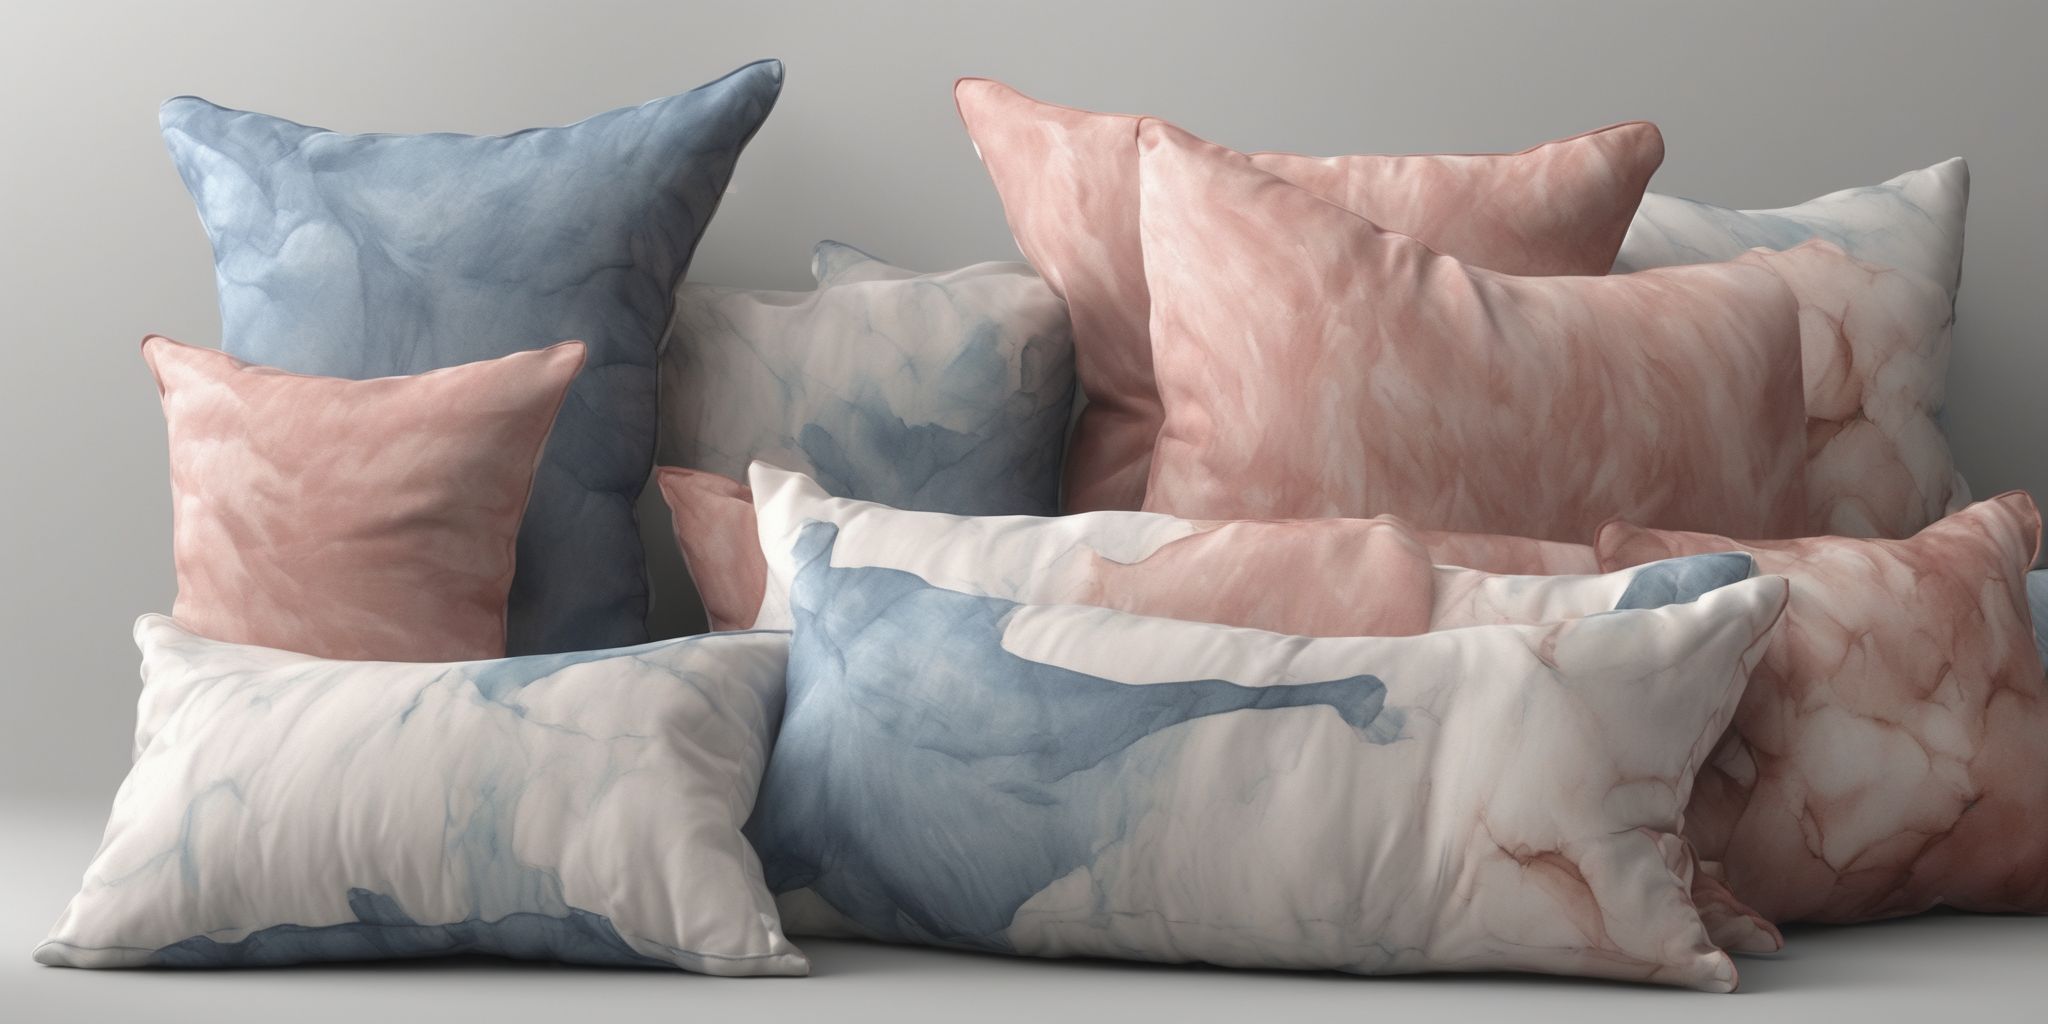 Pillows  in realistic, photographic style